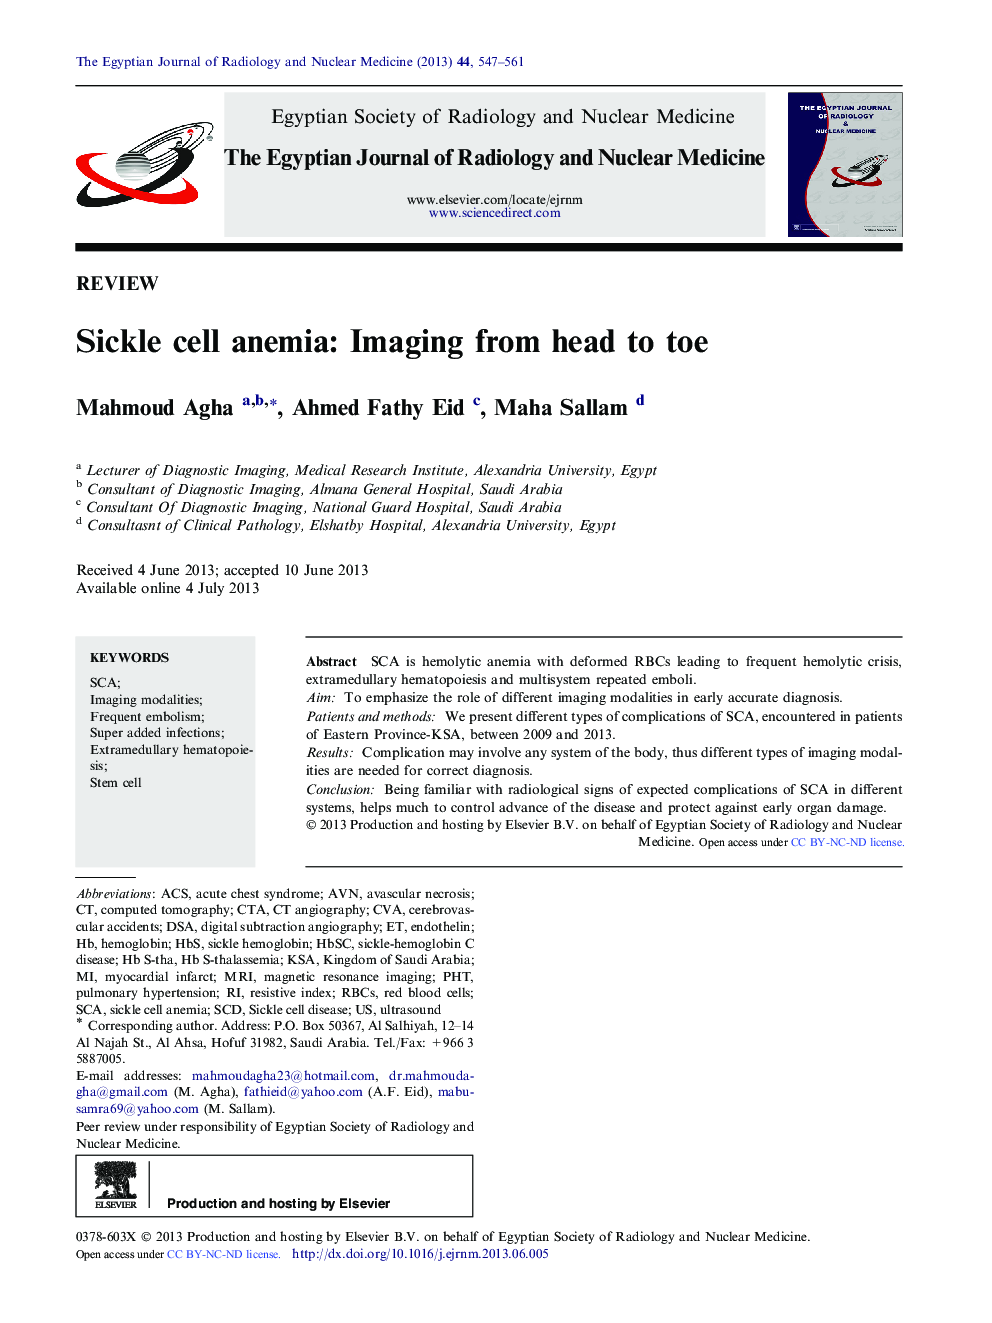 Sickle cell anemia: Imaging from head to toe 